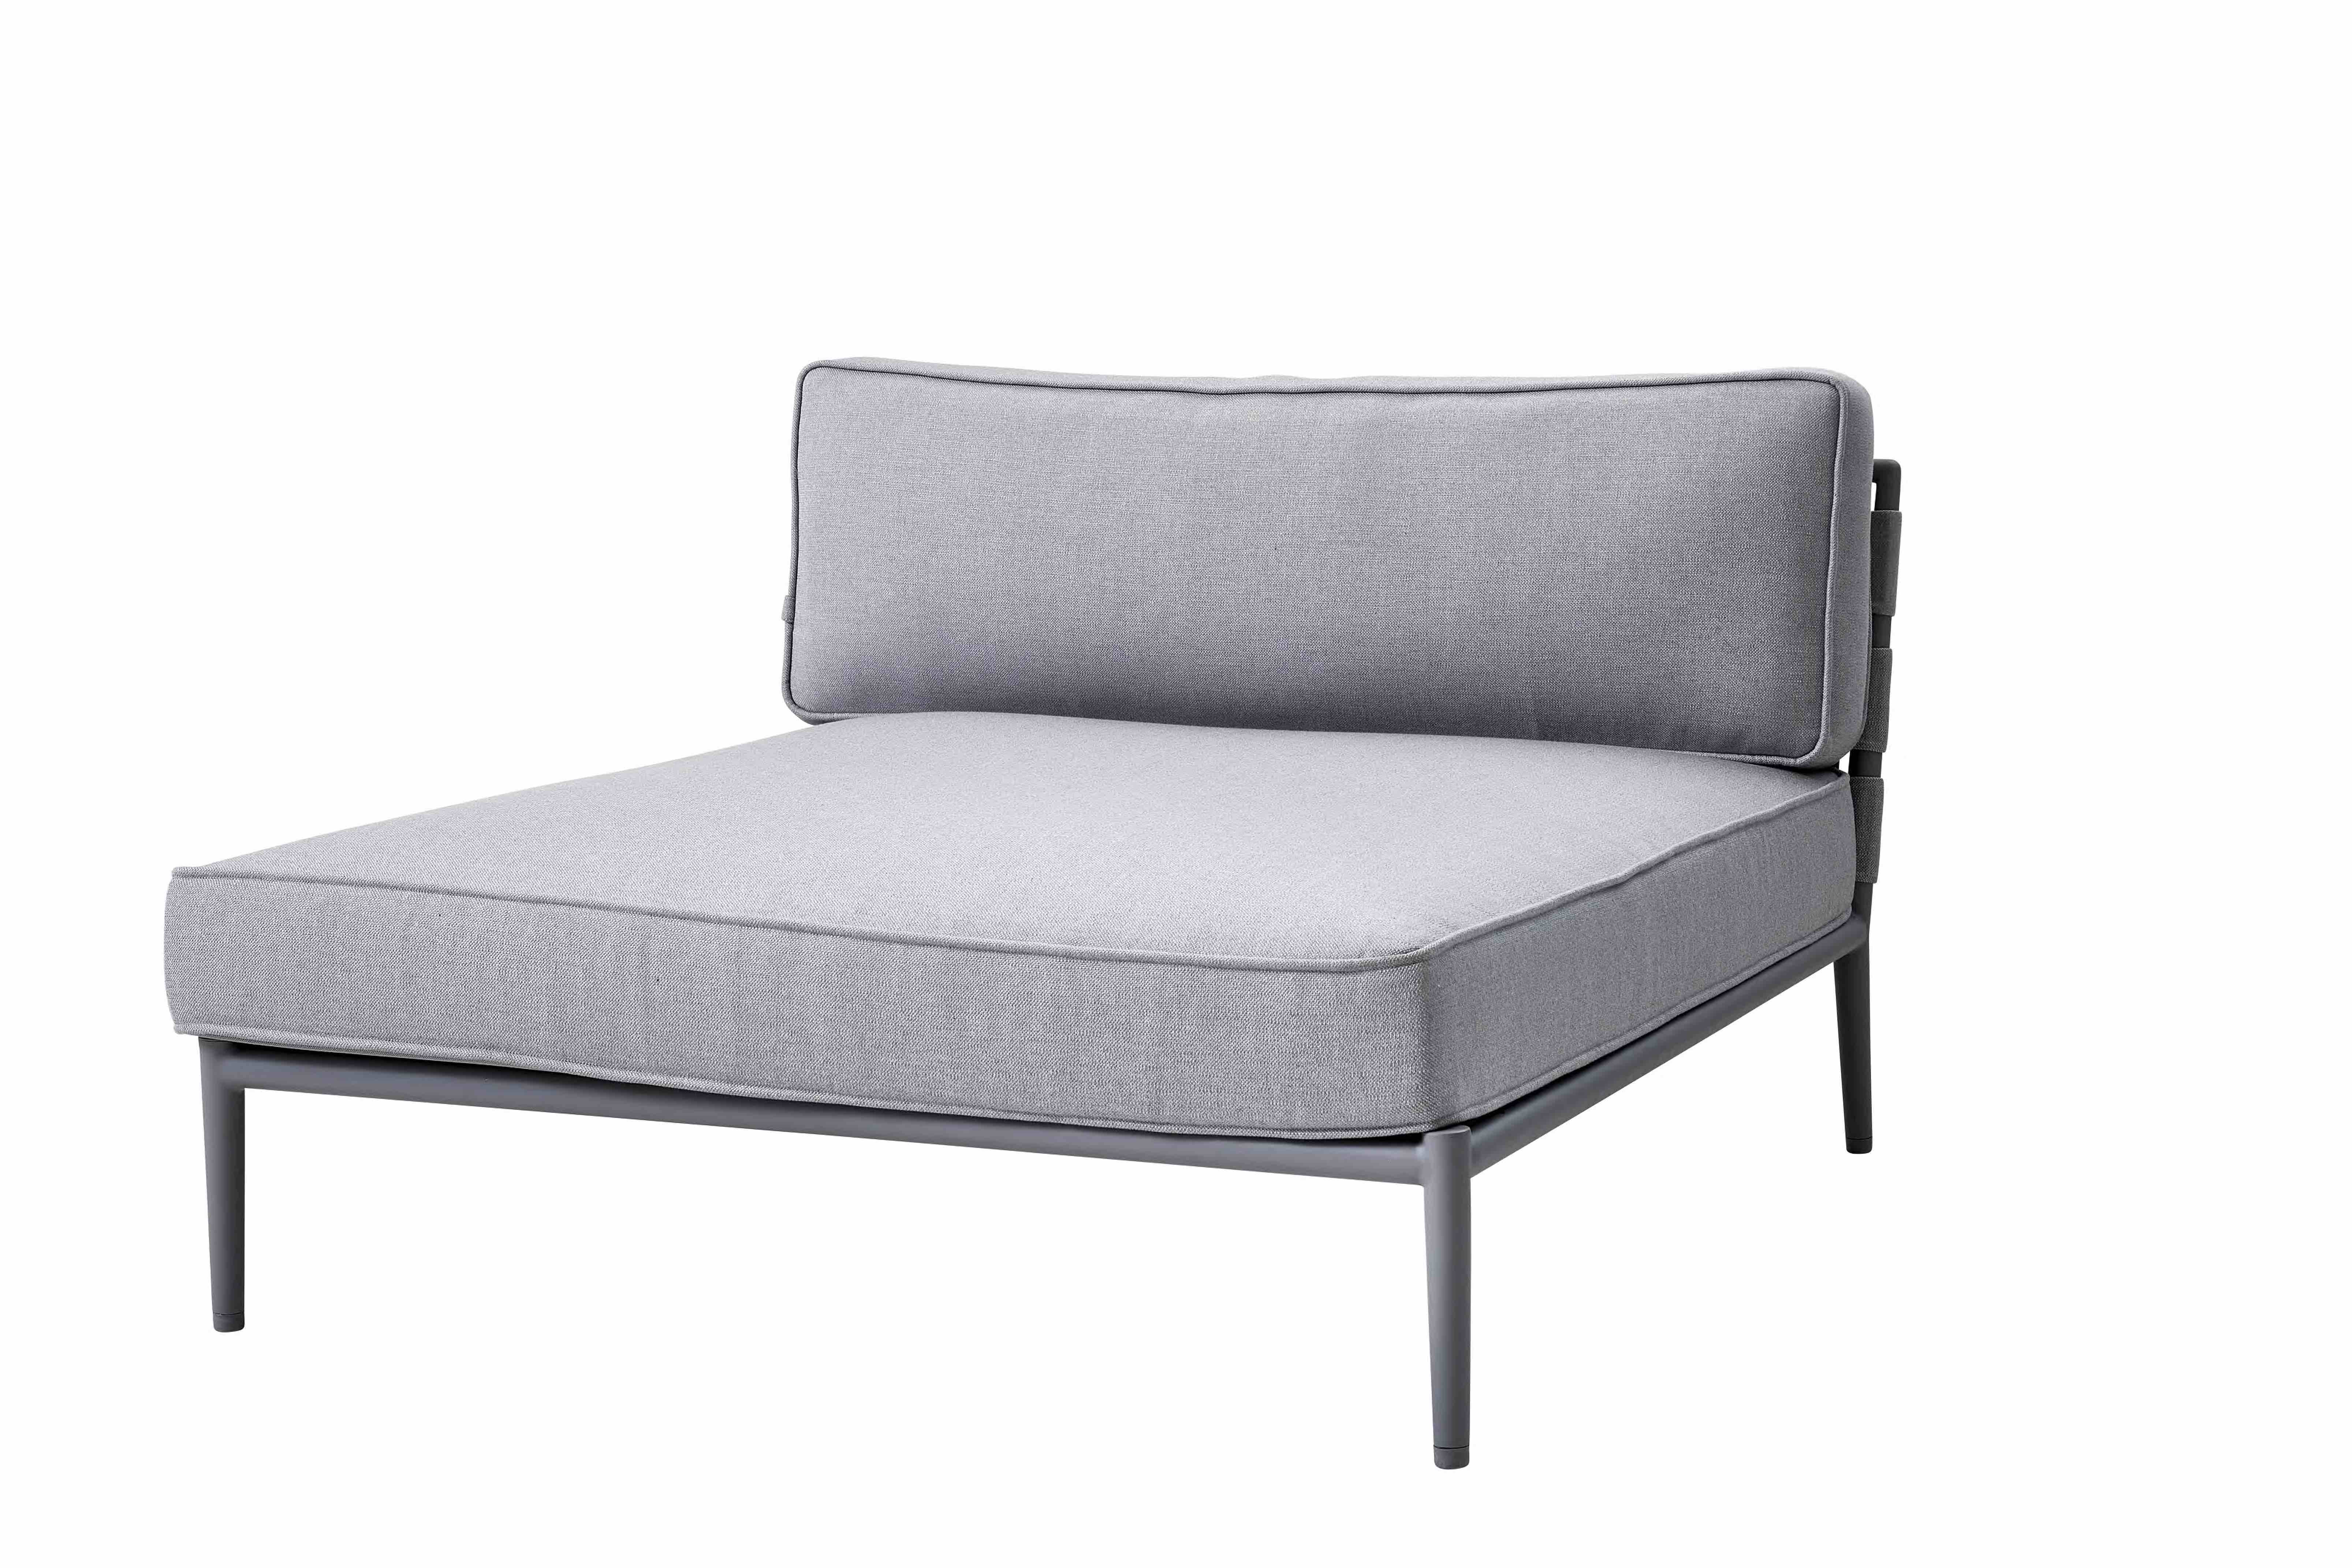 CONIC Daybed Farbe: Farbvariante 2